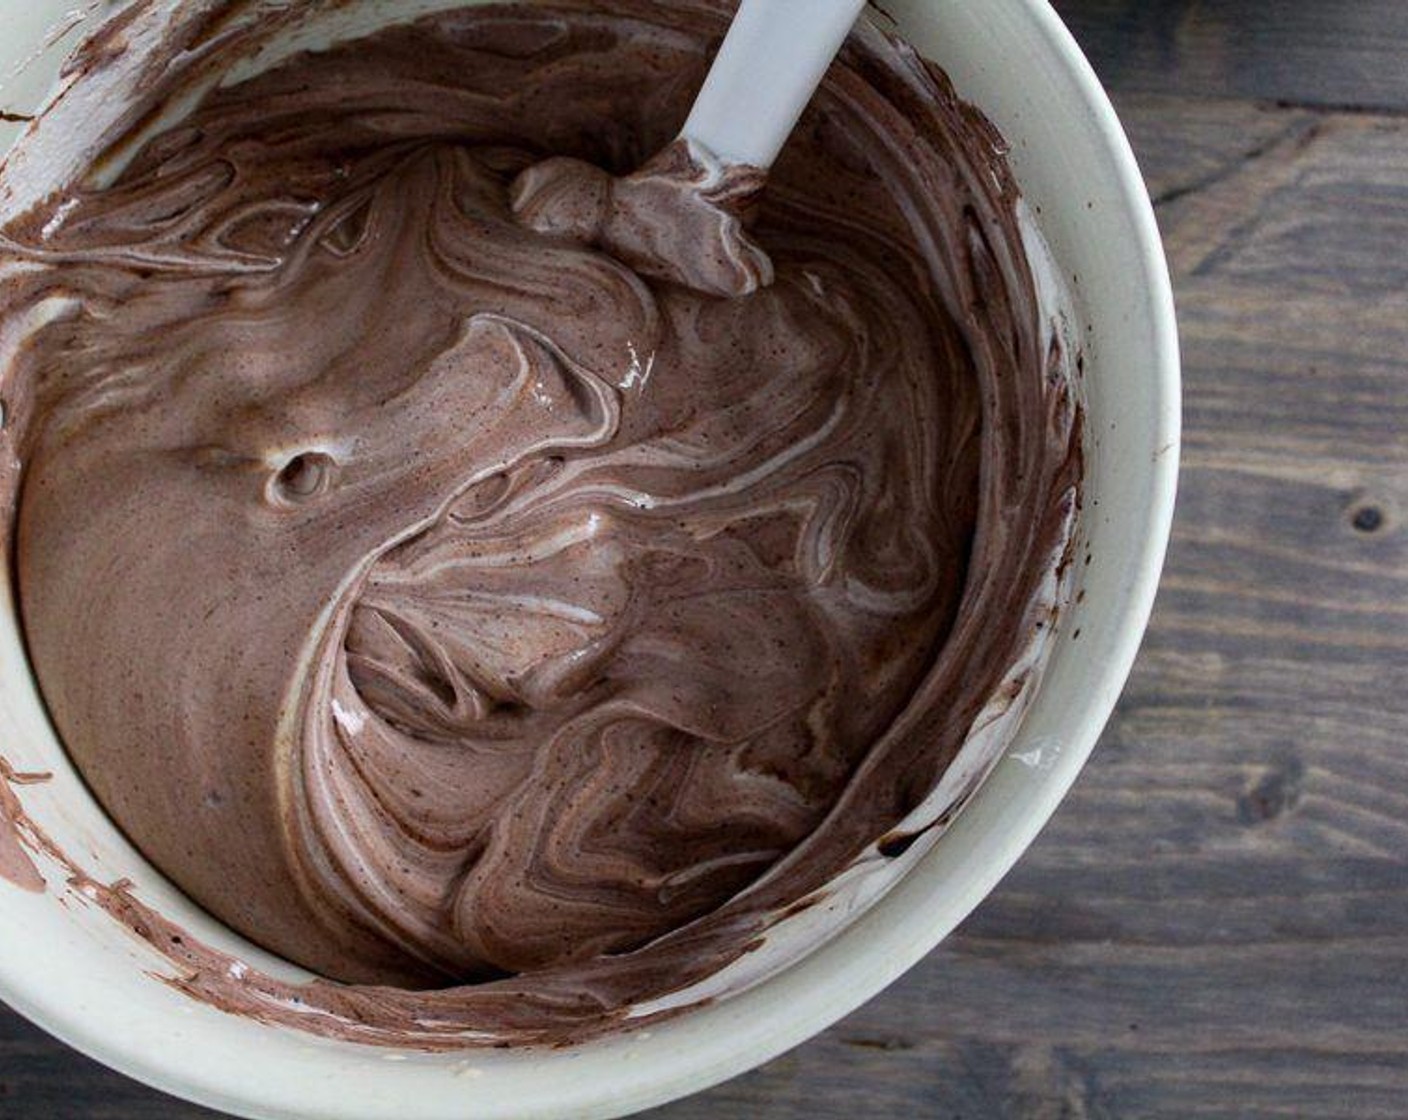 step 4 In a large mixing bowl, blend together the cooled Coffee (3/4 cup), Half and Half (3/4 cup), and Vanilla Extract (1/2 tsp). Then stir in the Instant Chocolate Fudge Pudding Mix (1 cup). With an electric mixer, beat on medium-high for about 3 minutes until creamy and smooth.